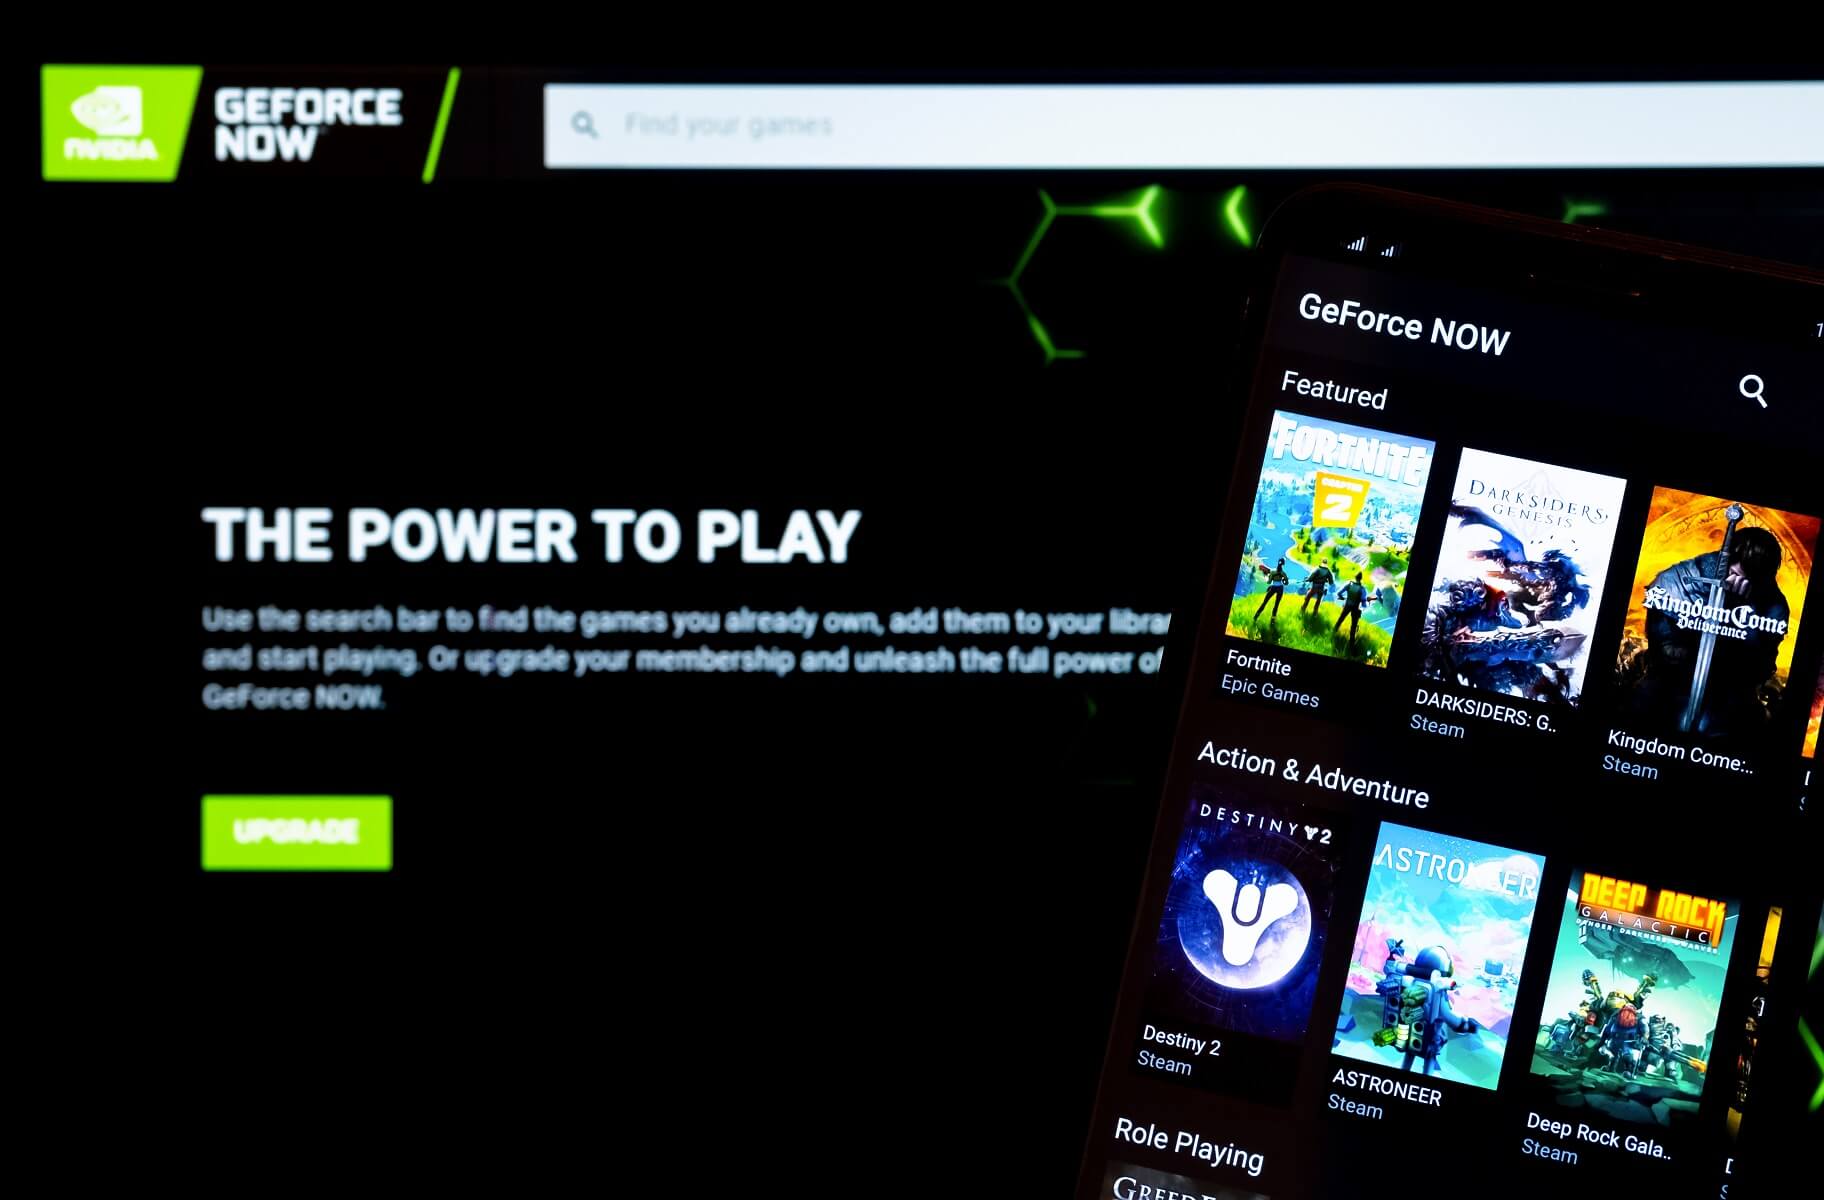 geforce experience record